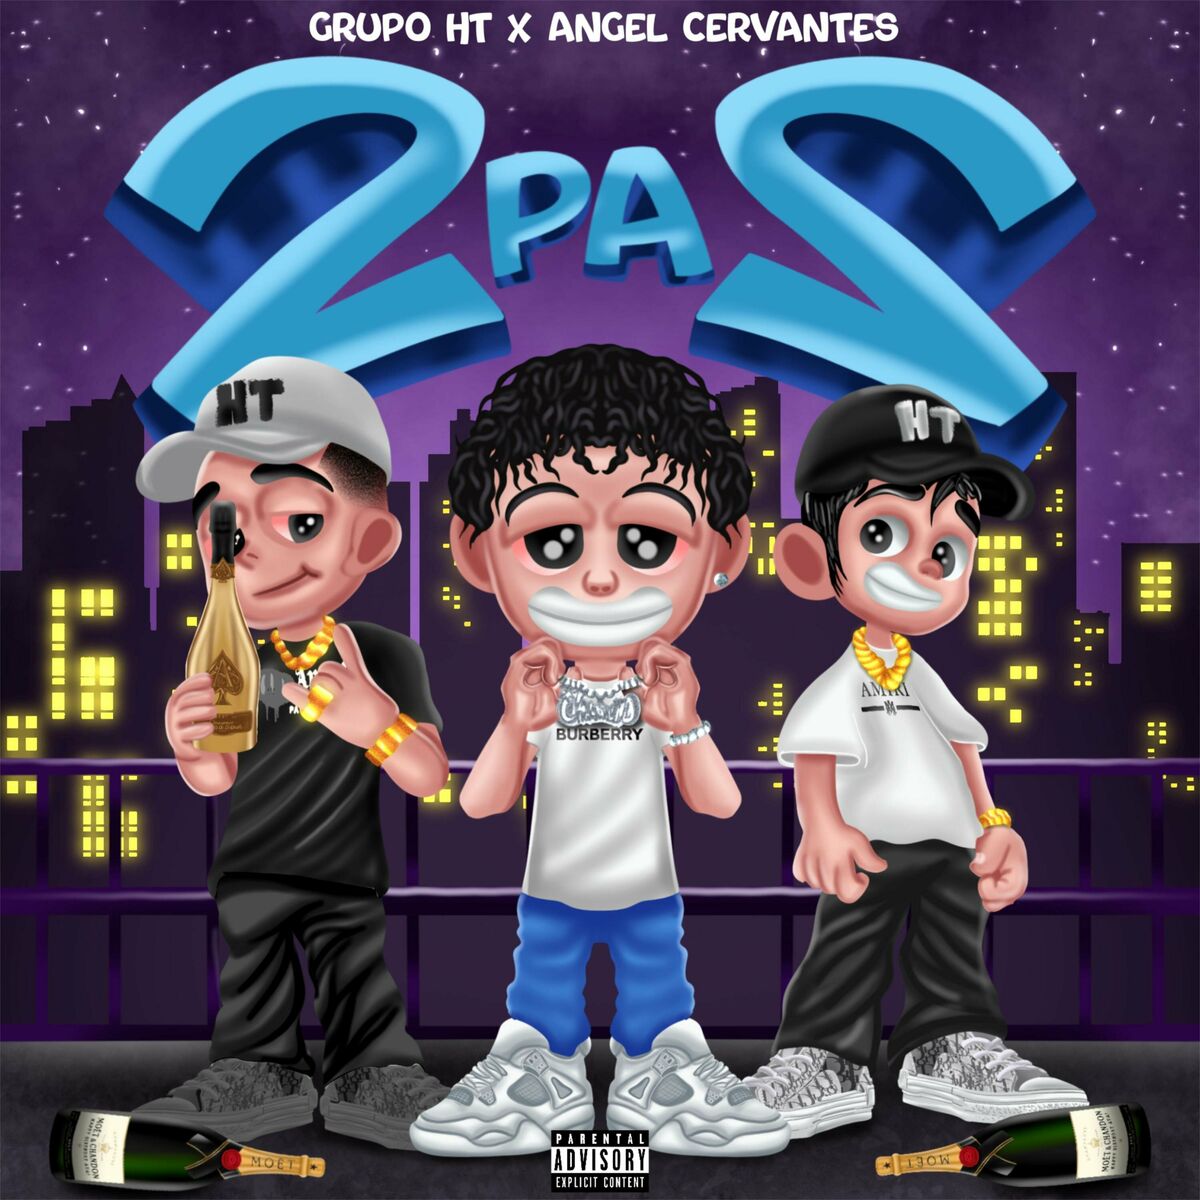 2 Pa 2: GHT Official, Angel Cervantes – 2 Pa 2